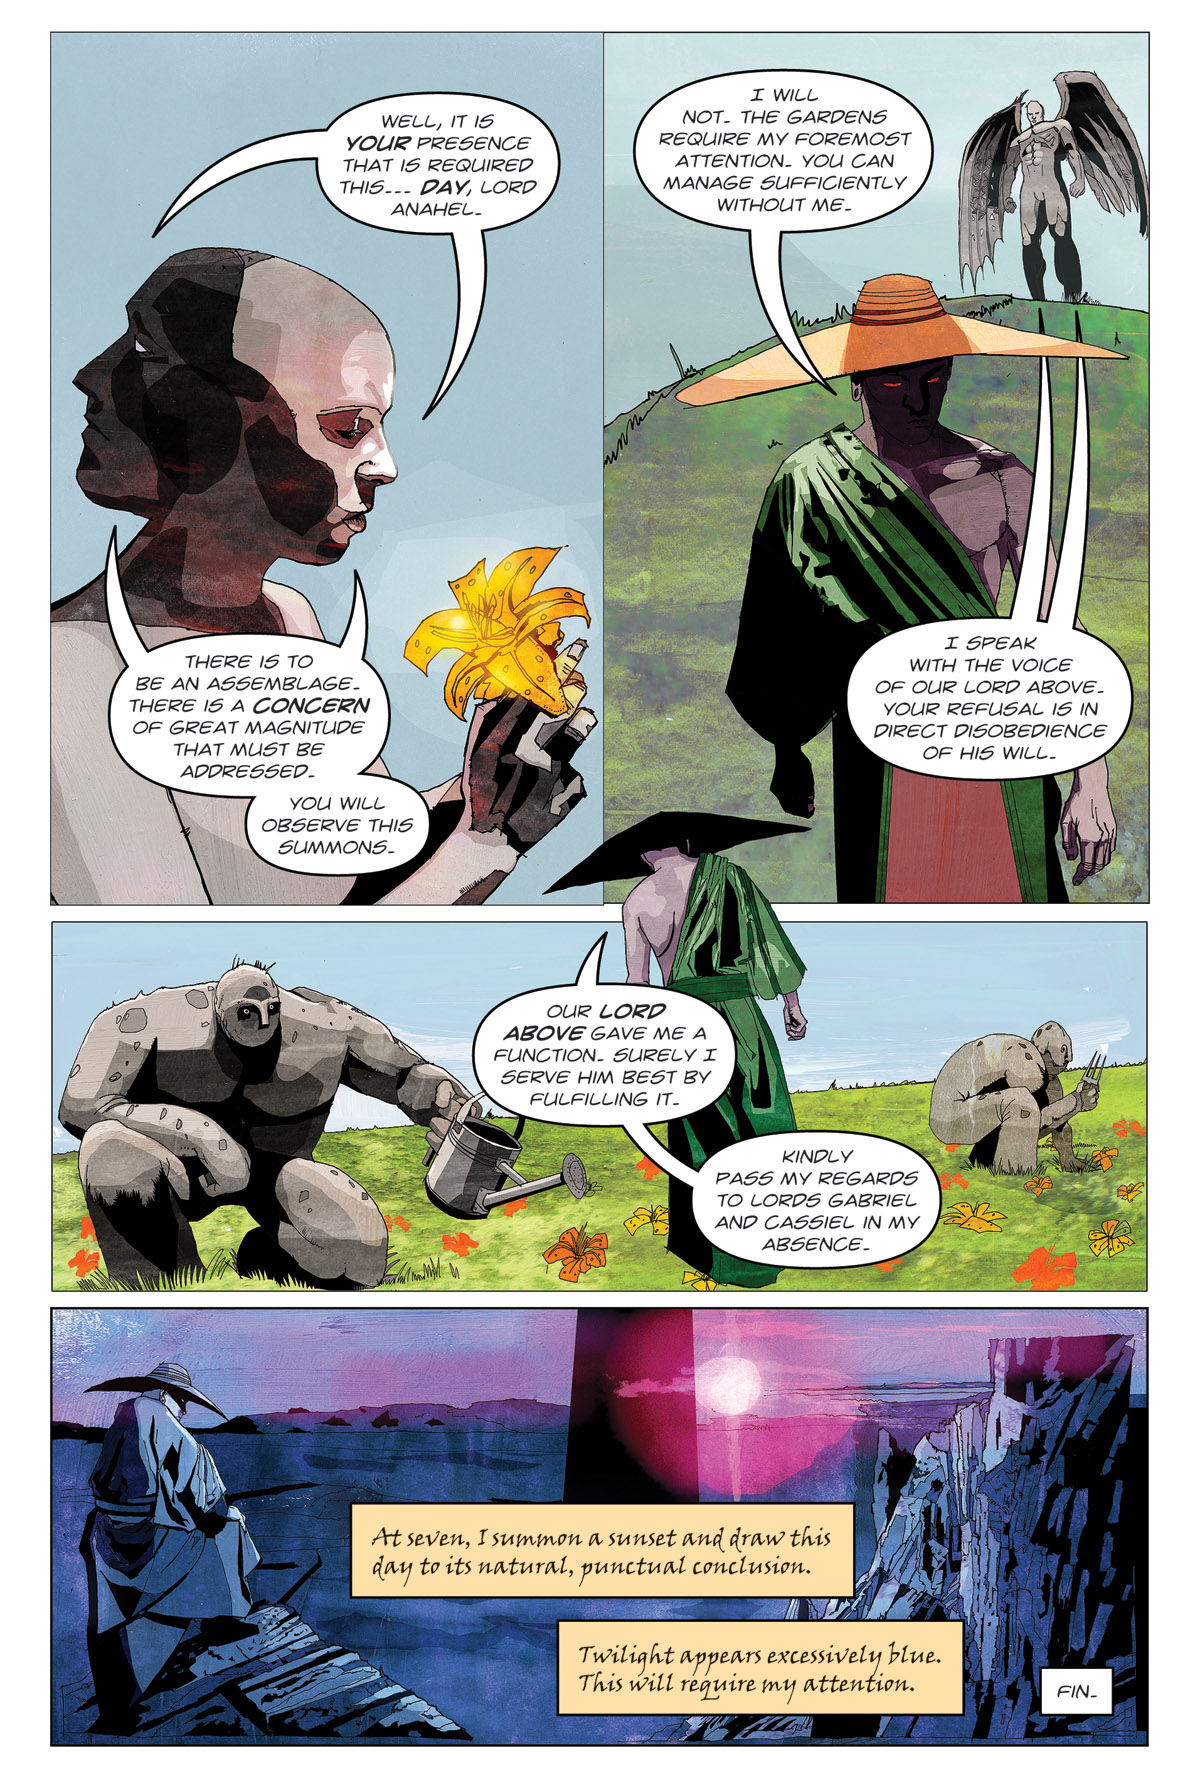 Afterlife Inc. | Dead Days | Anahel | Page 4